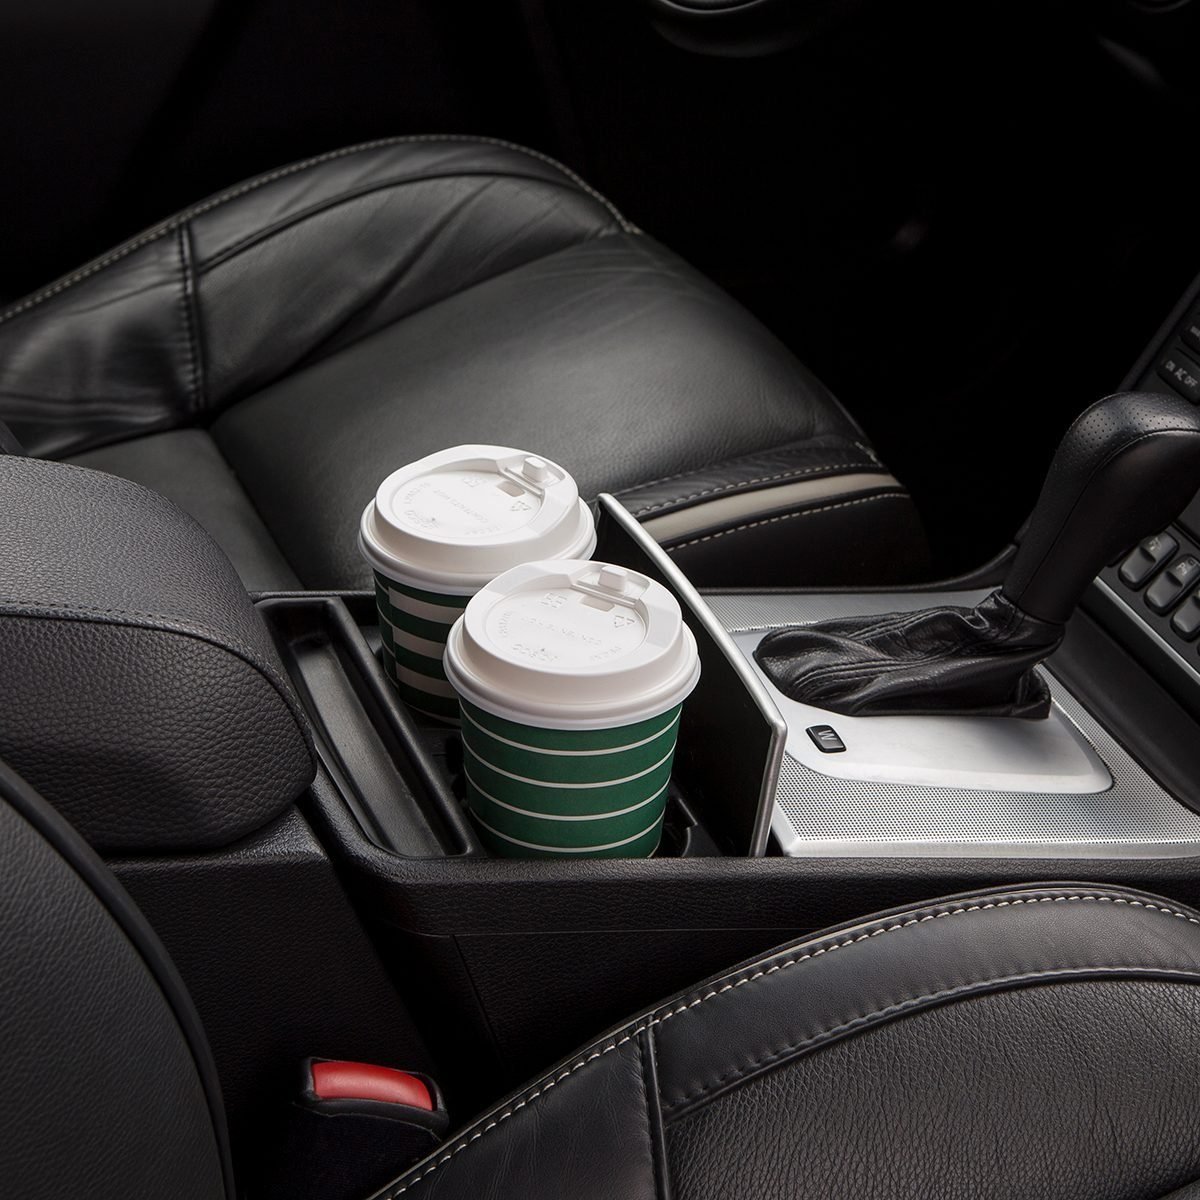 Cups in a car holder